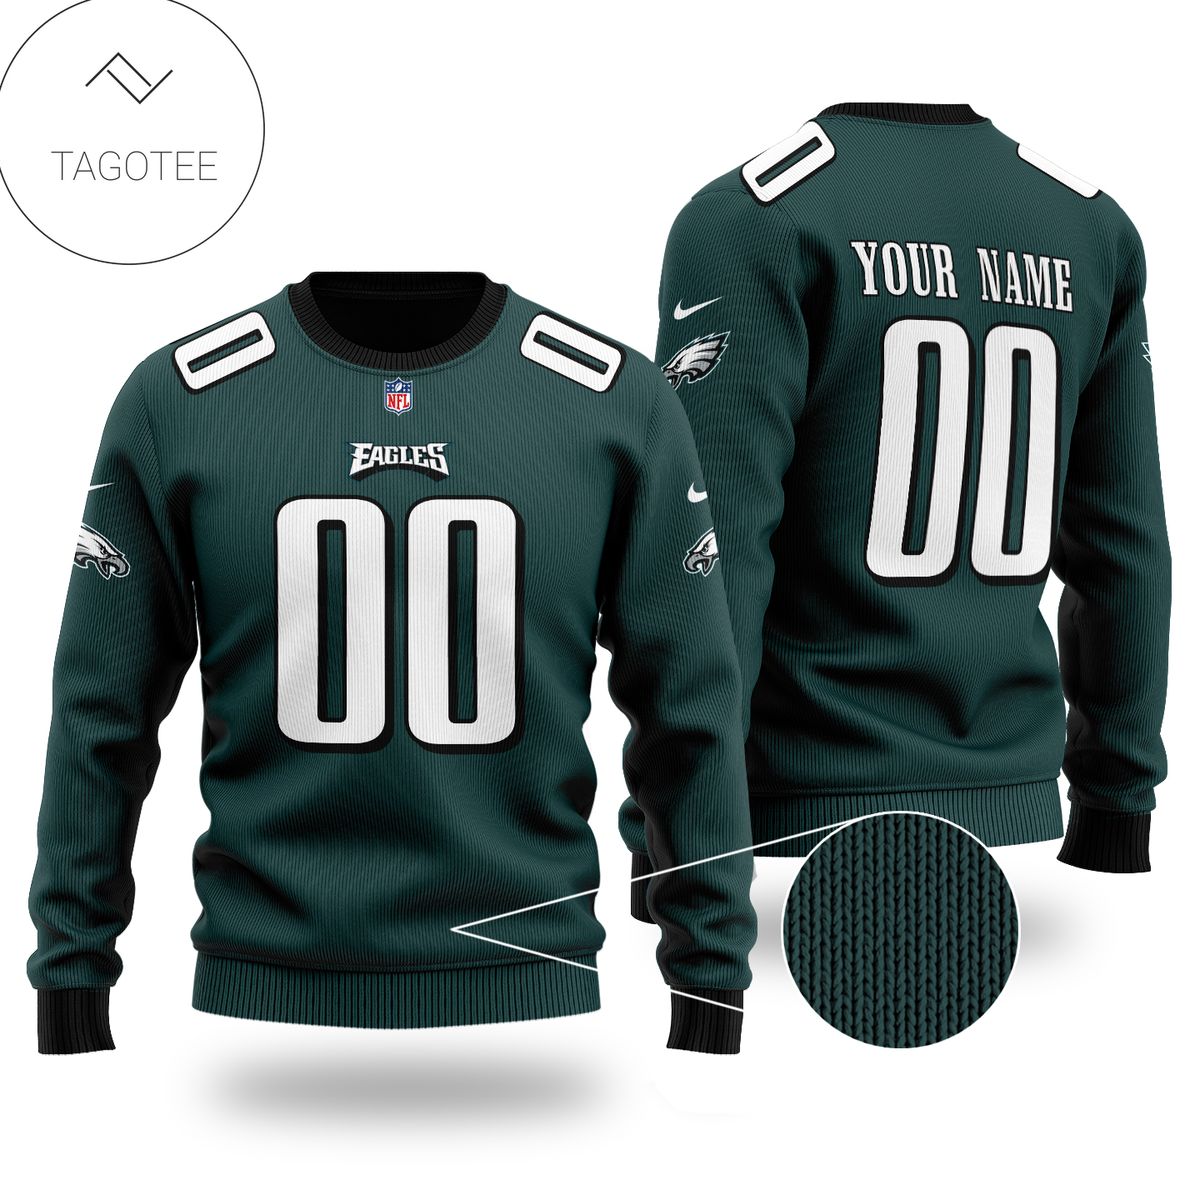 Top Rated Personalized Philadelphia Eagles Ugly Christmas Sweater